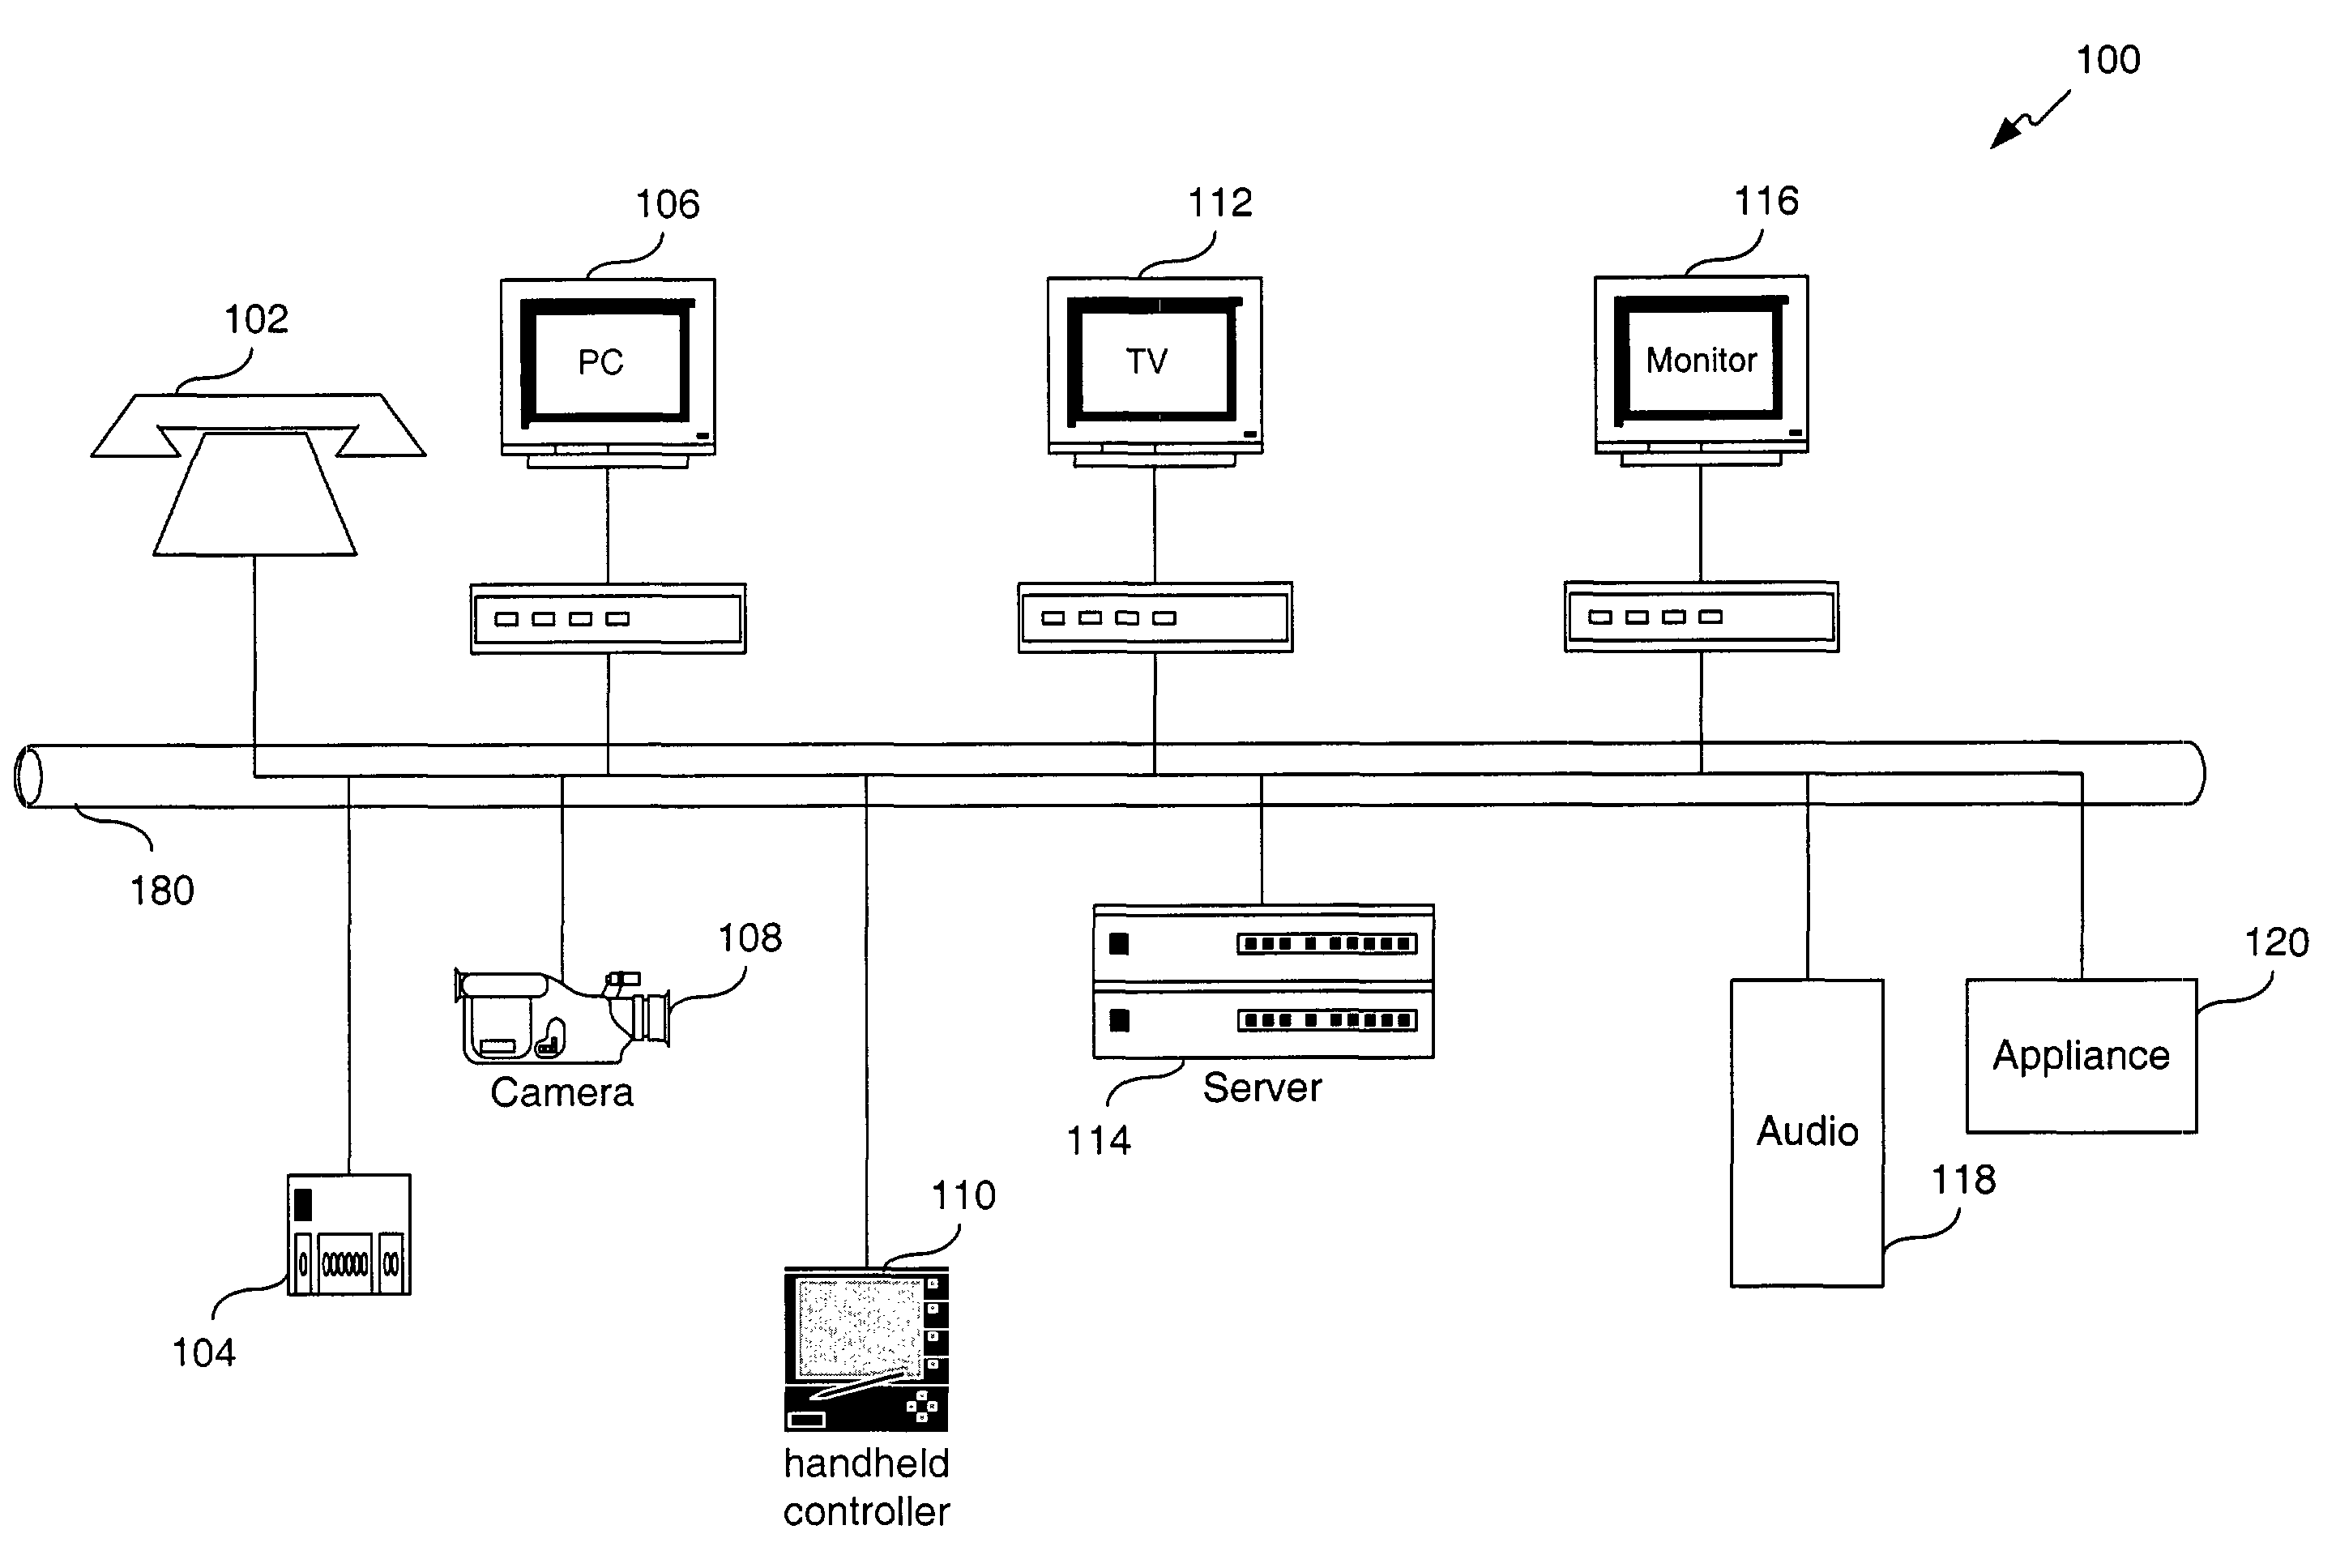 Method, system, and computer program product for managing controlled residential or non-residential environments